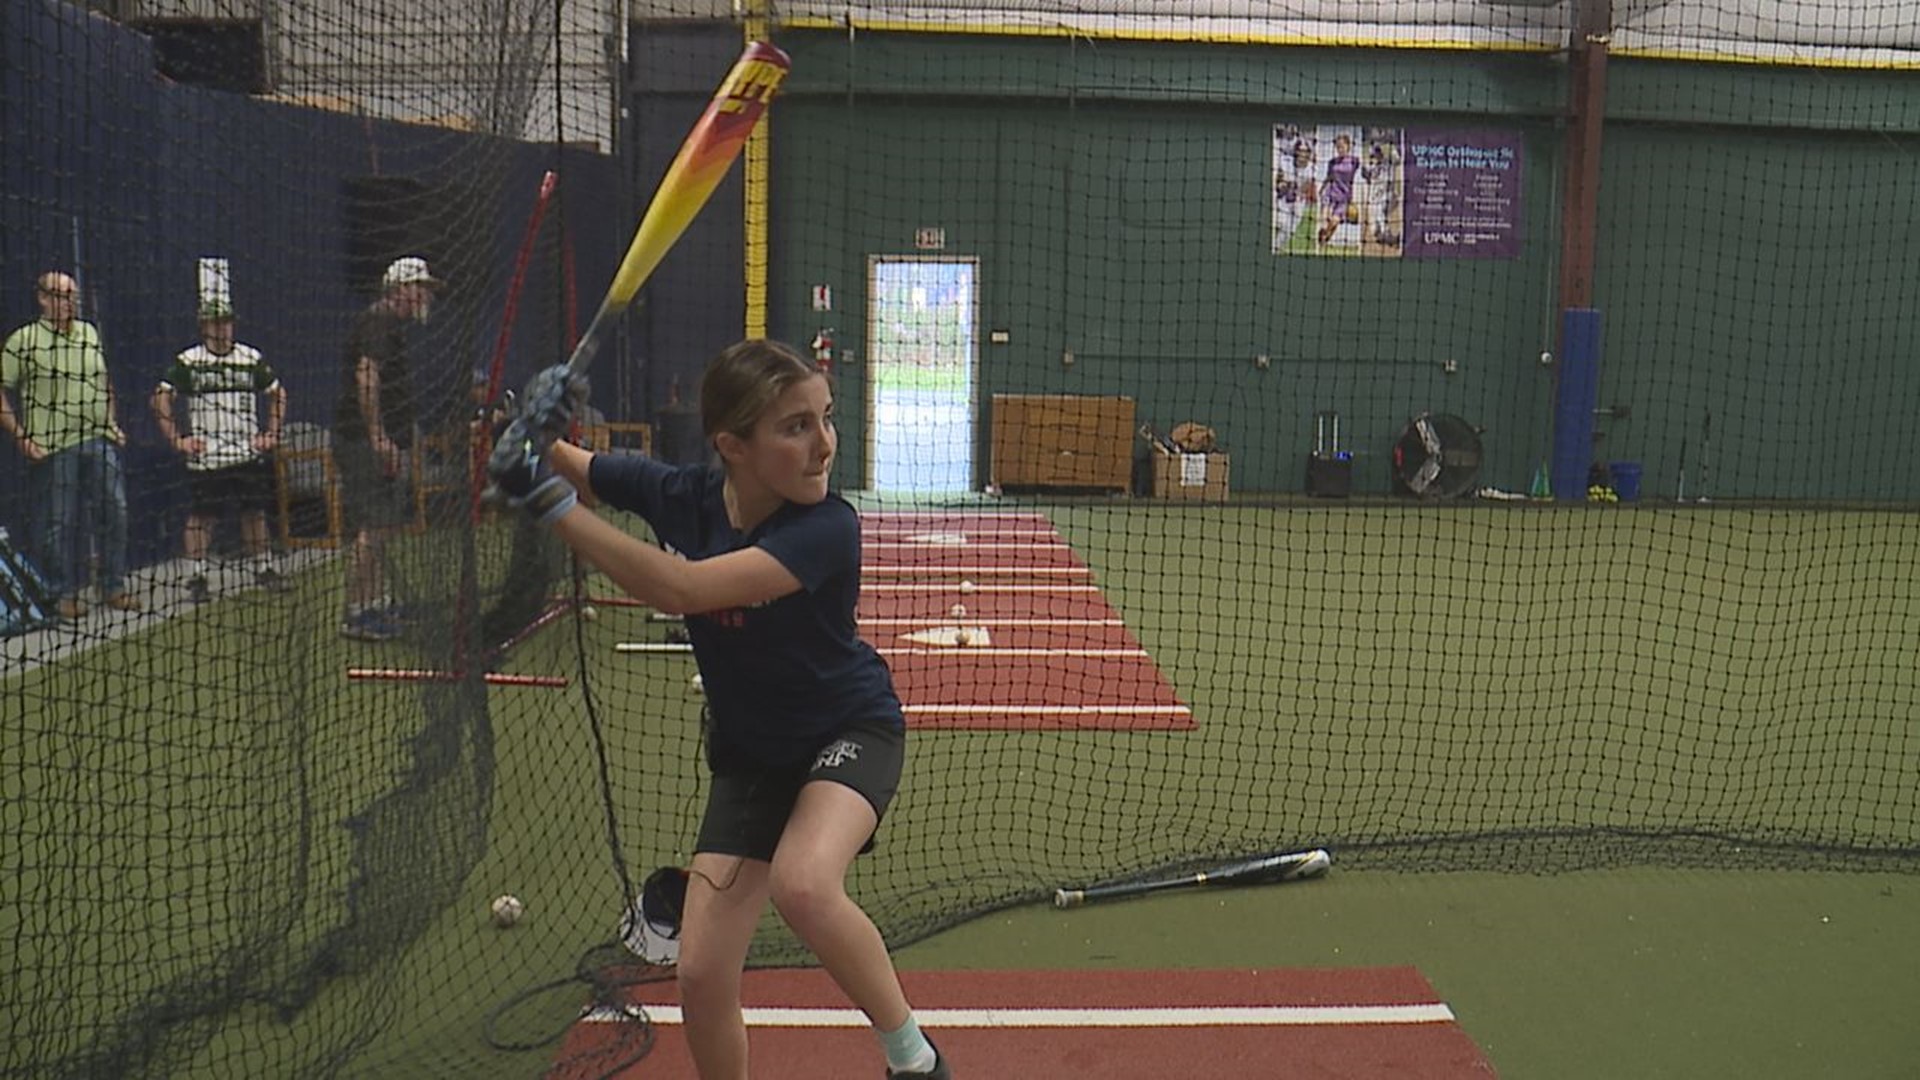 Nailor is one of 96 girls invited to take part in the MLB's Trailblazer Series where she will compete against the best baseball players in the world.